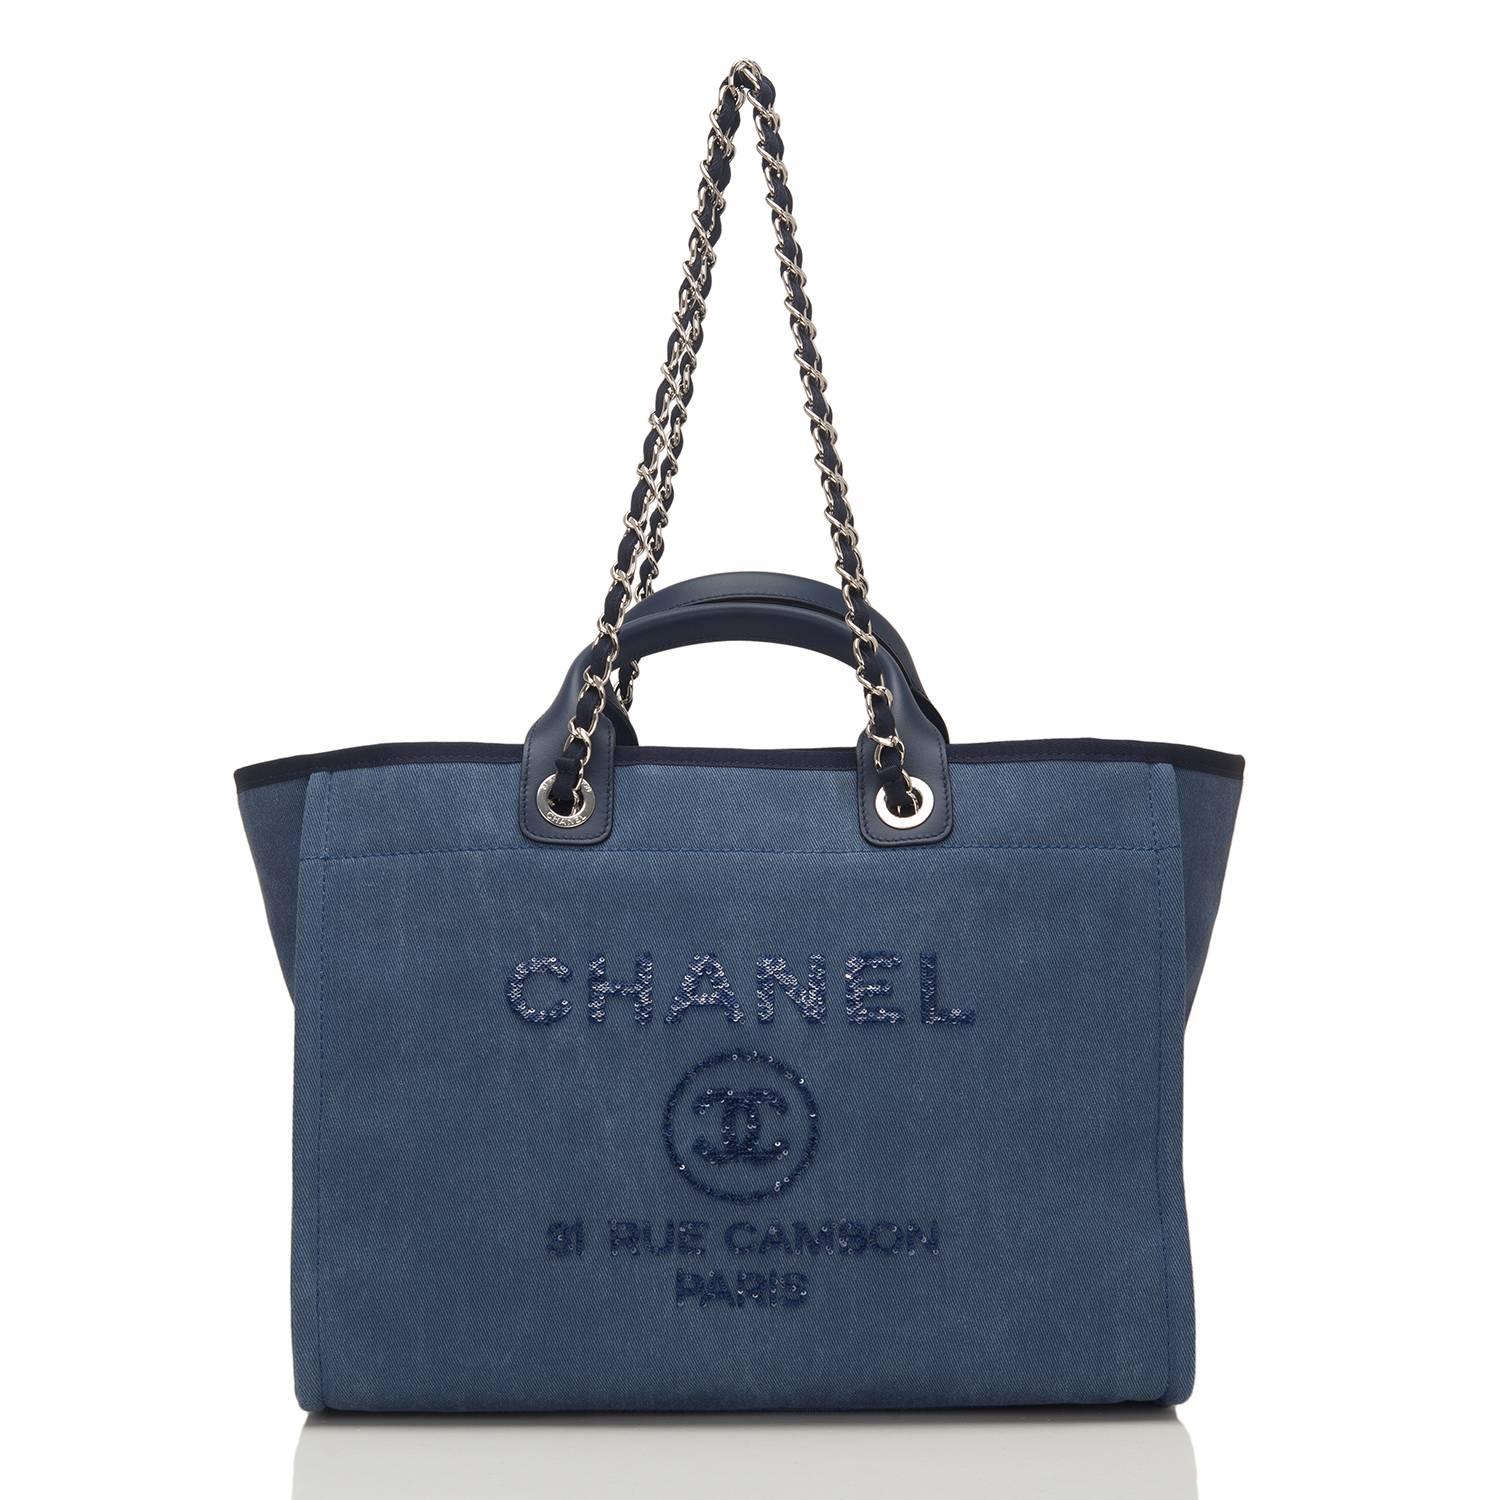 Chanel Large Navy Canvas With Sequins Deauville Tote For Sale 1